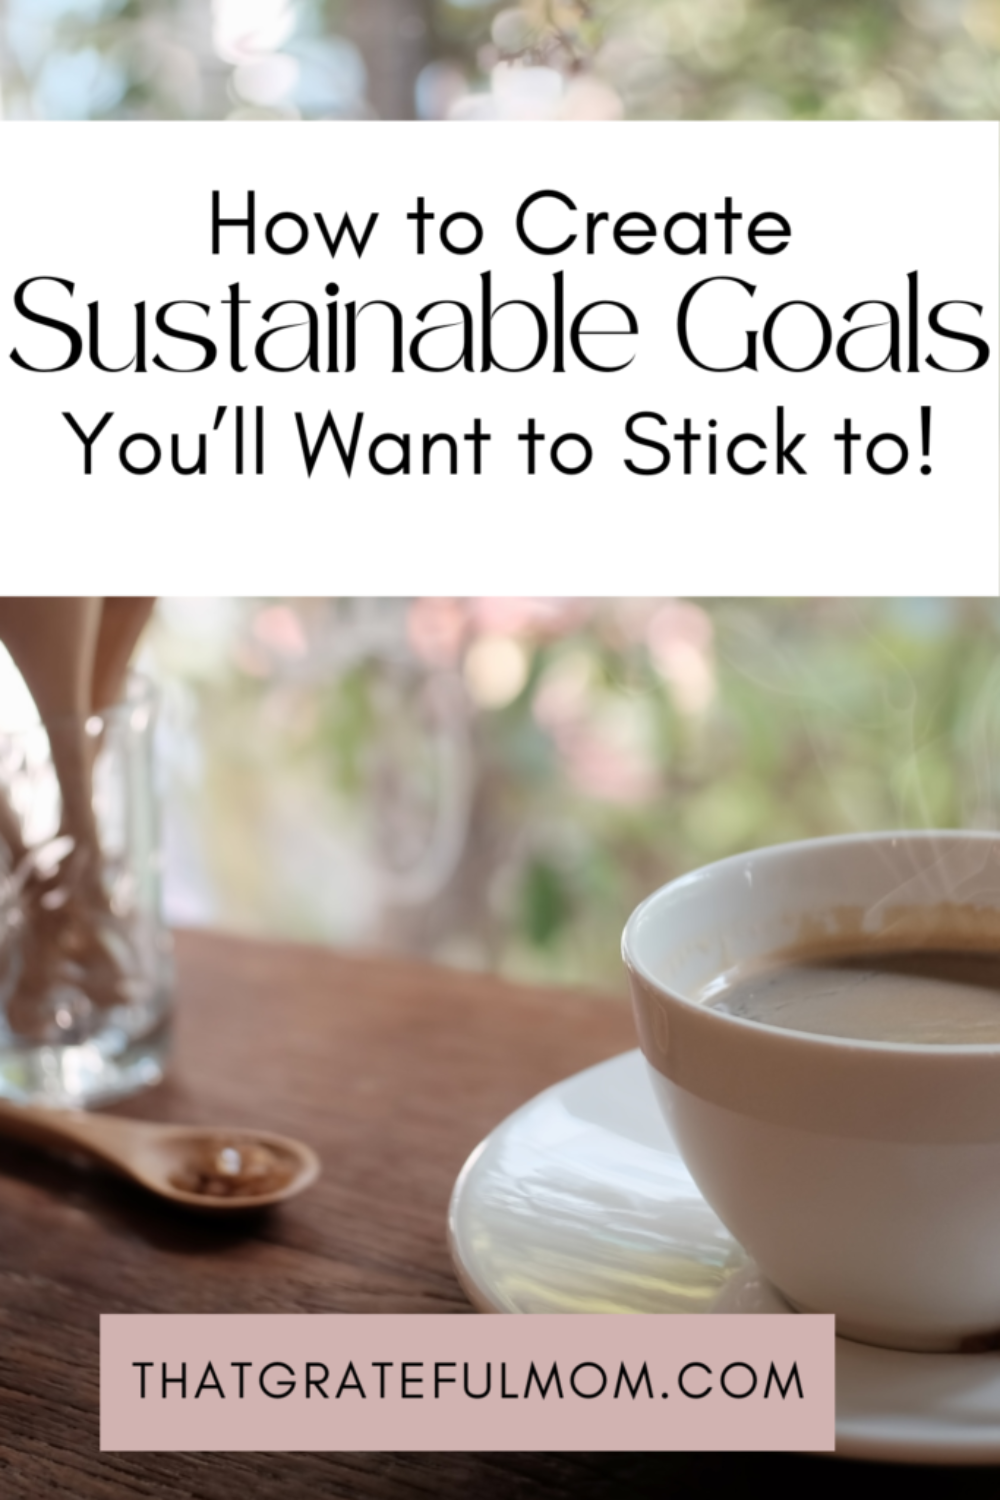 Creating sustainable goals is simple with shifts in your daily habits